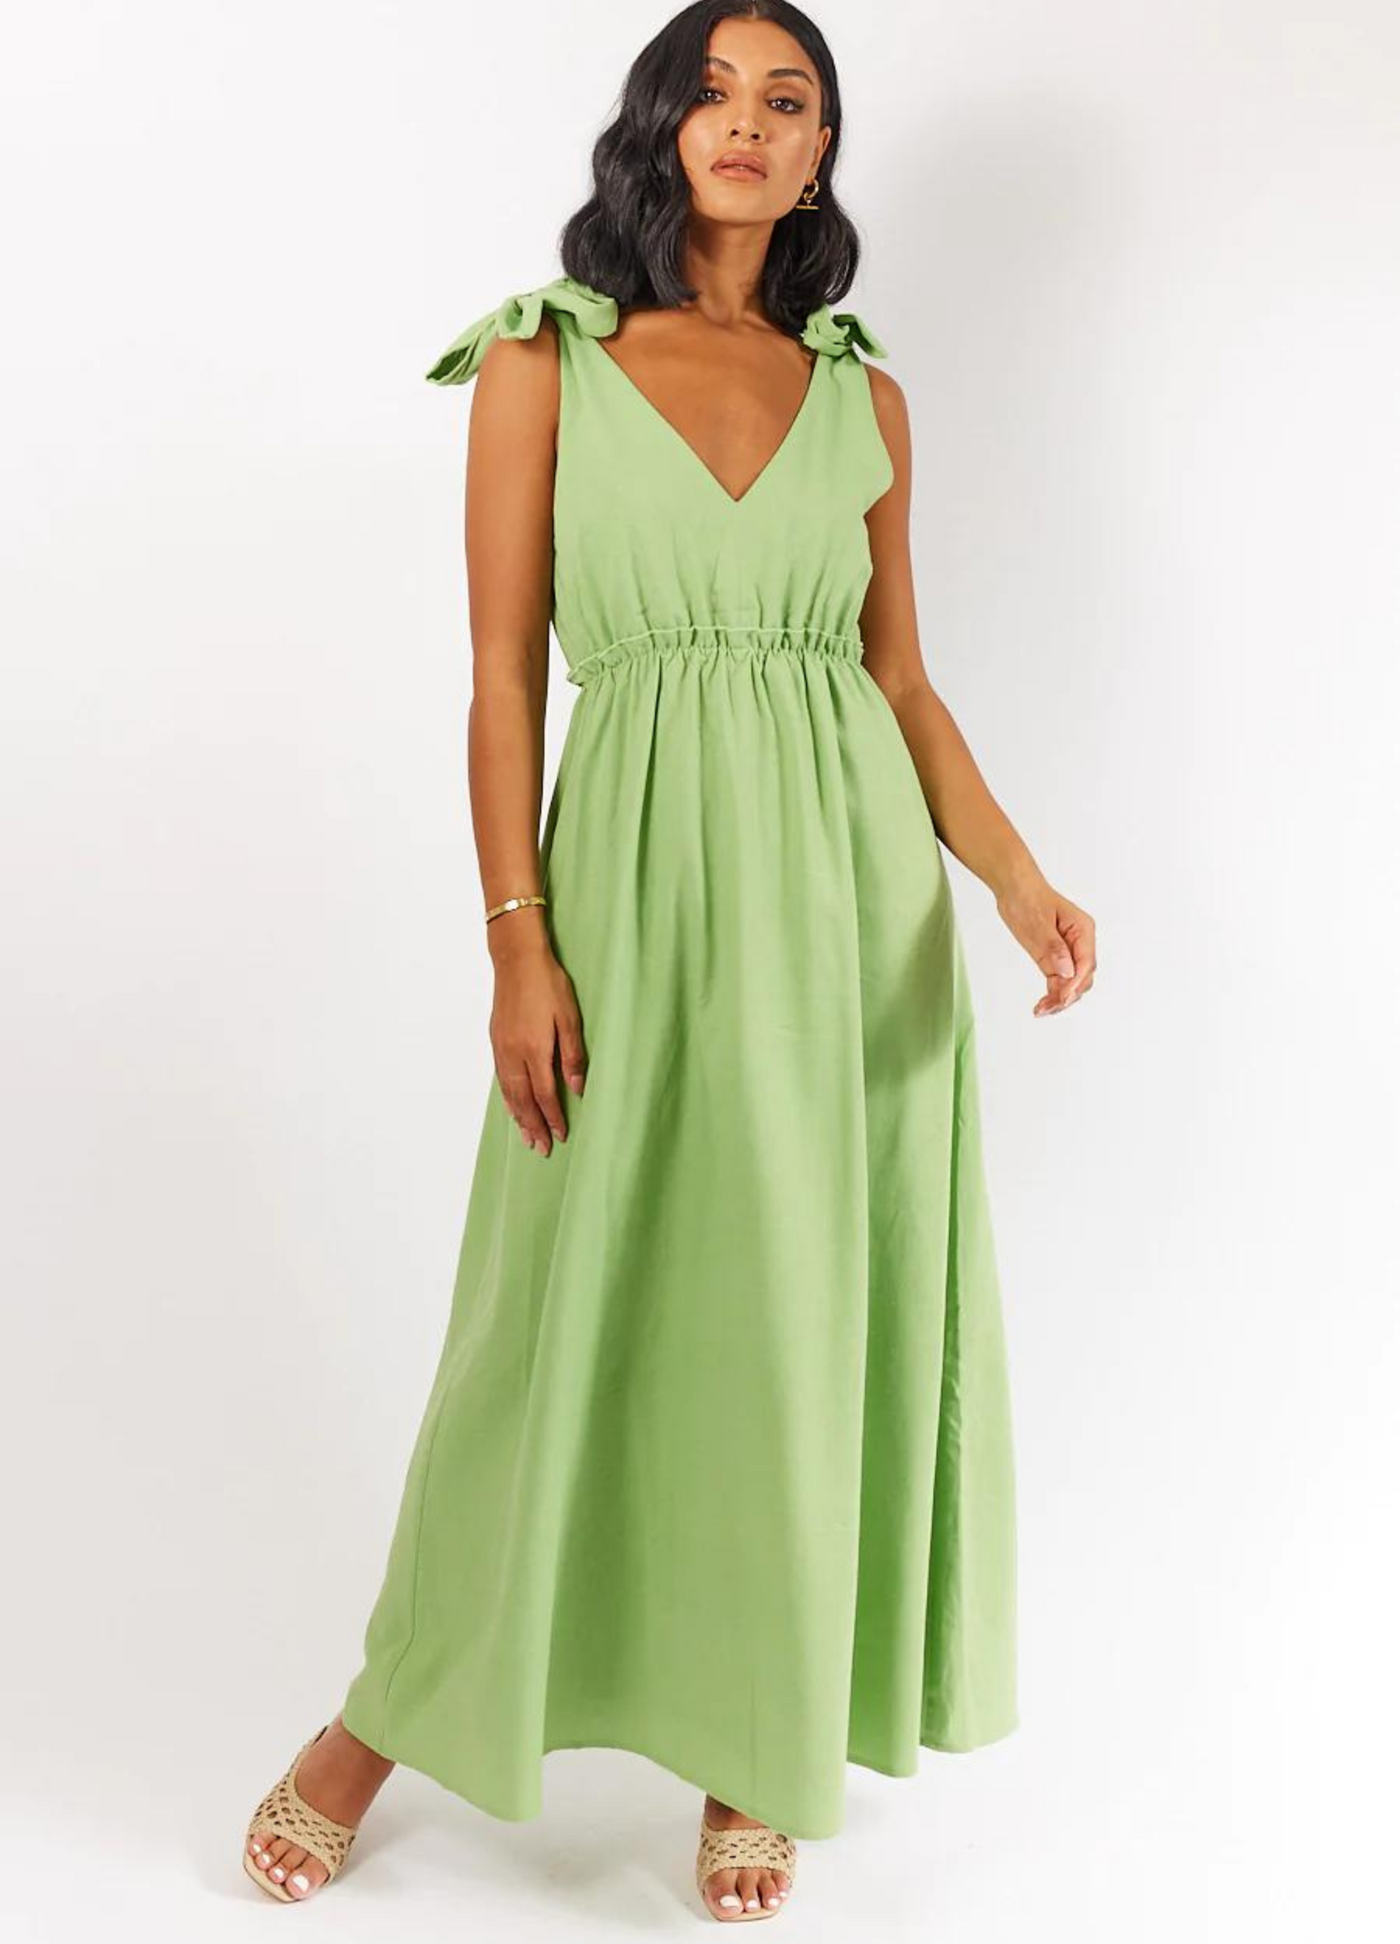 Model wearing Promise Apple Green Dress with tie shoulders and elasticated waist detail